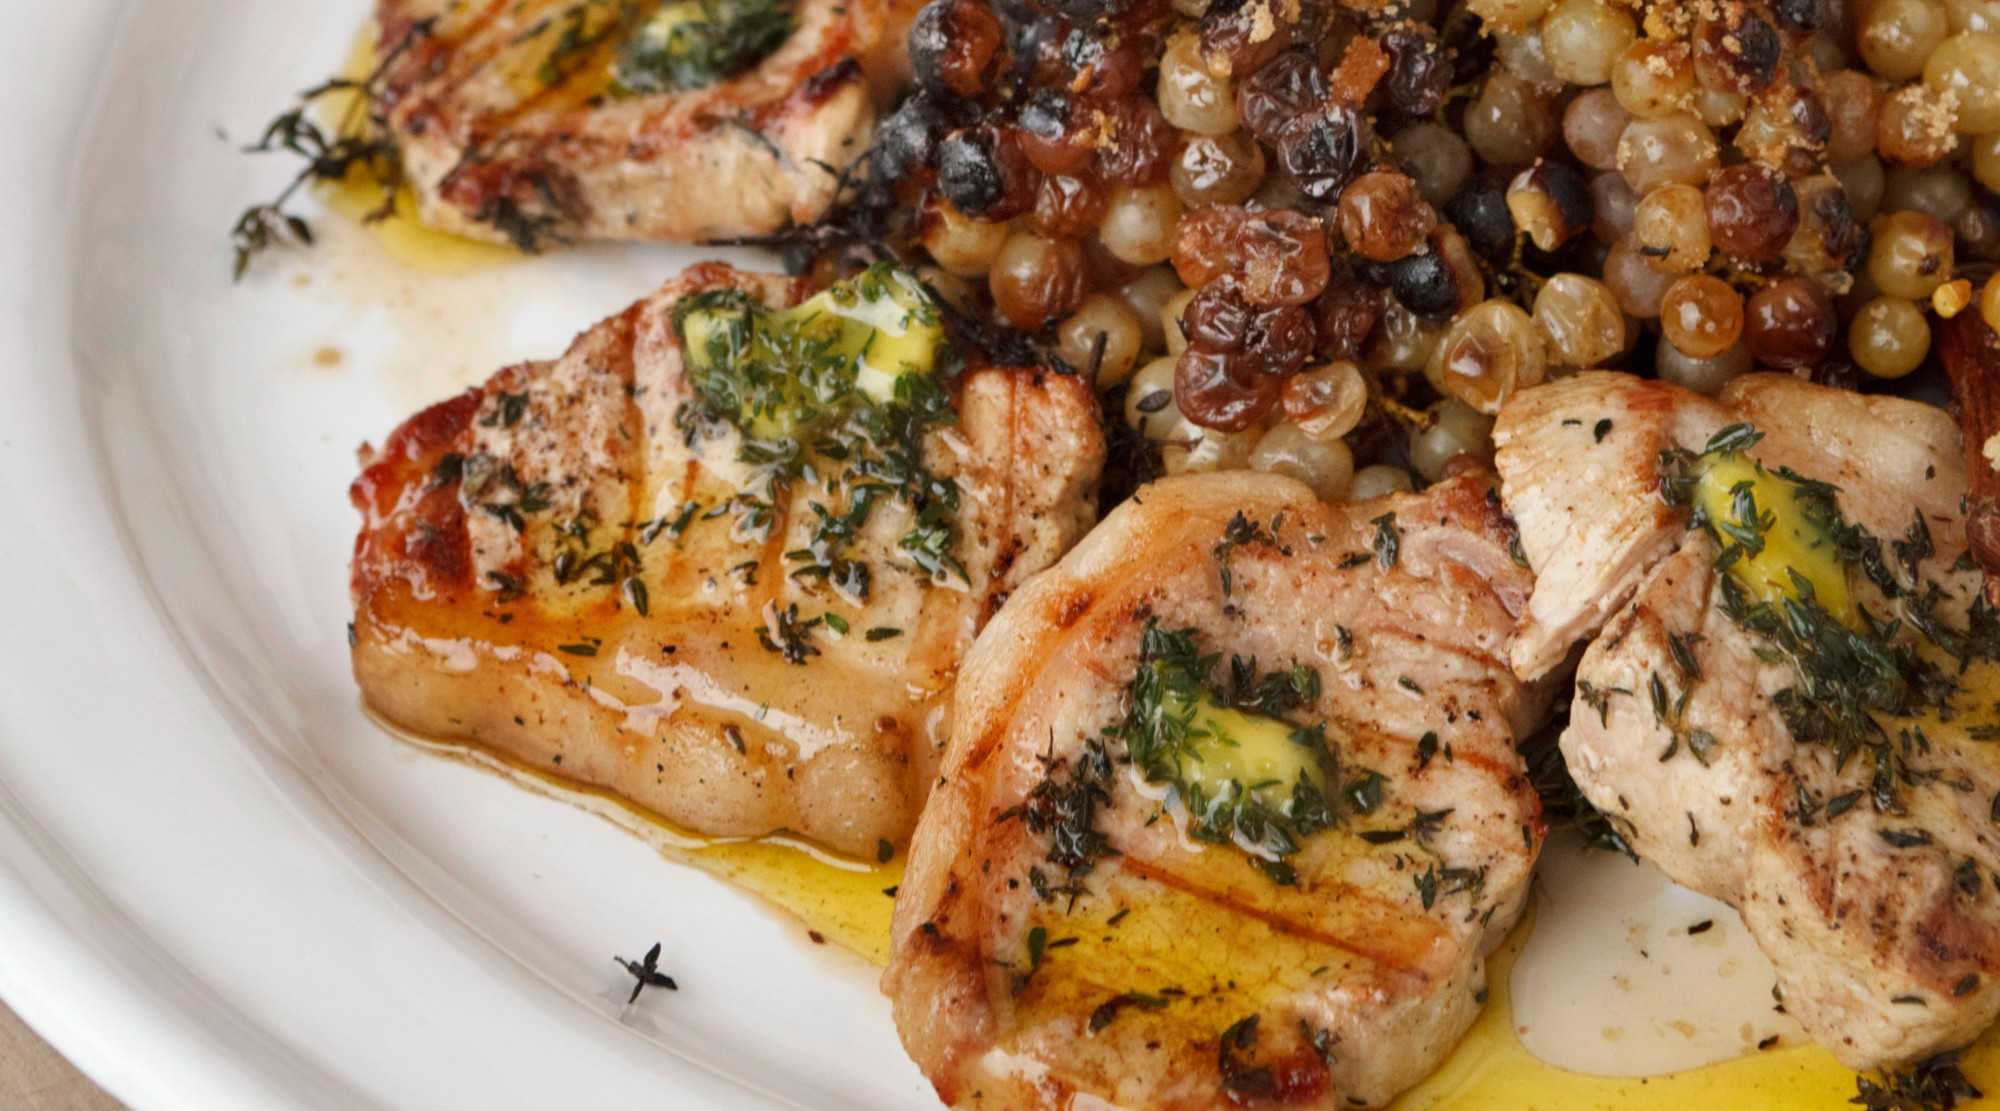 Recipes For Pork Loin Chops
 Pork Loin Chops with Thyme Oil and Roasted Grapes on the